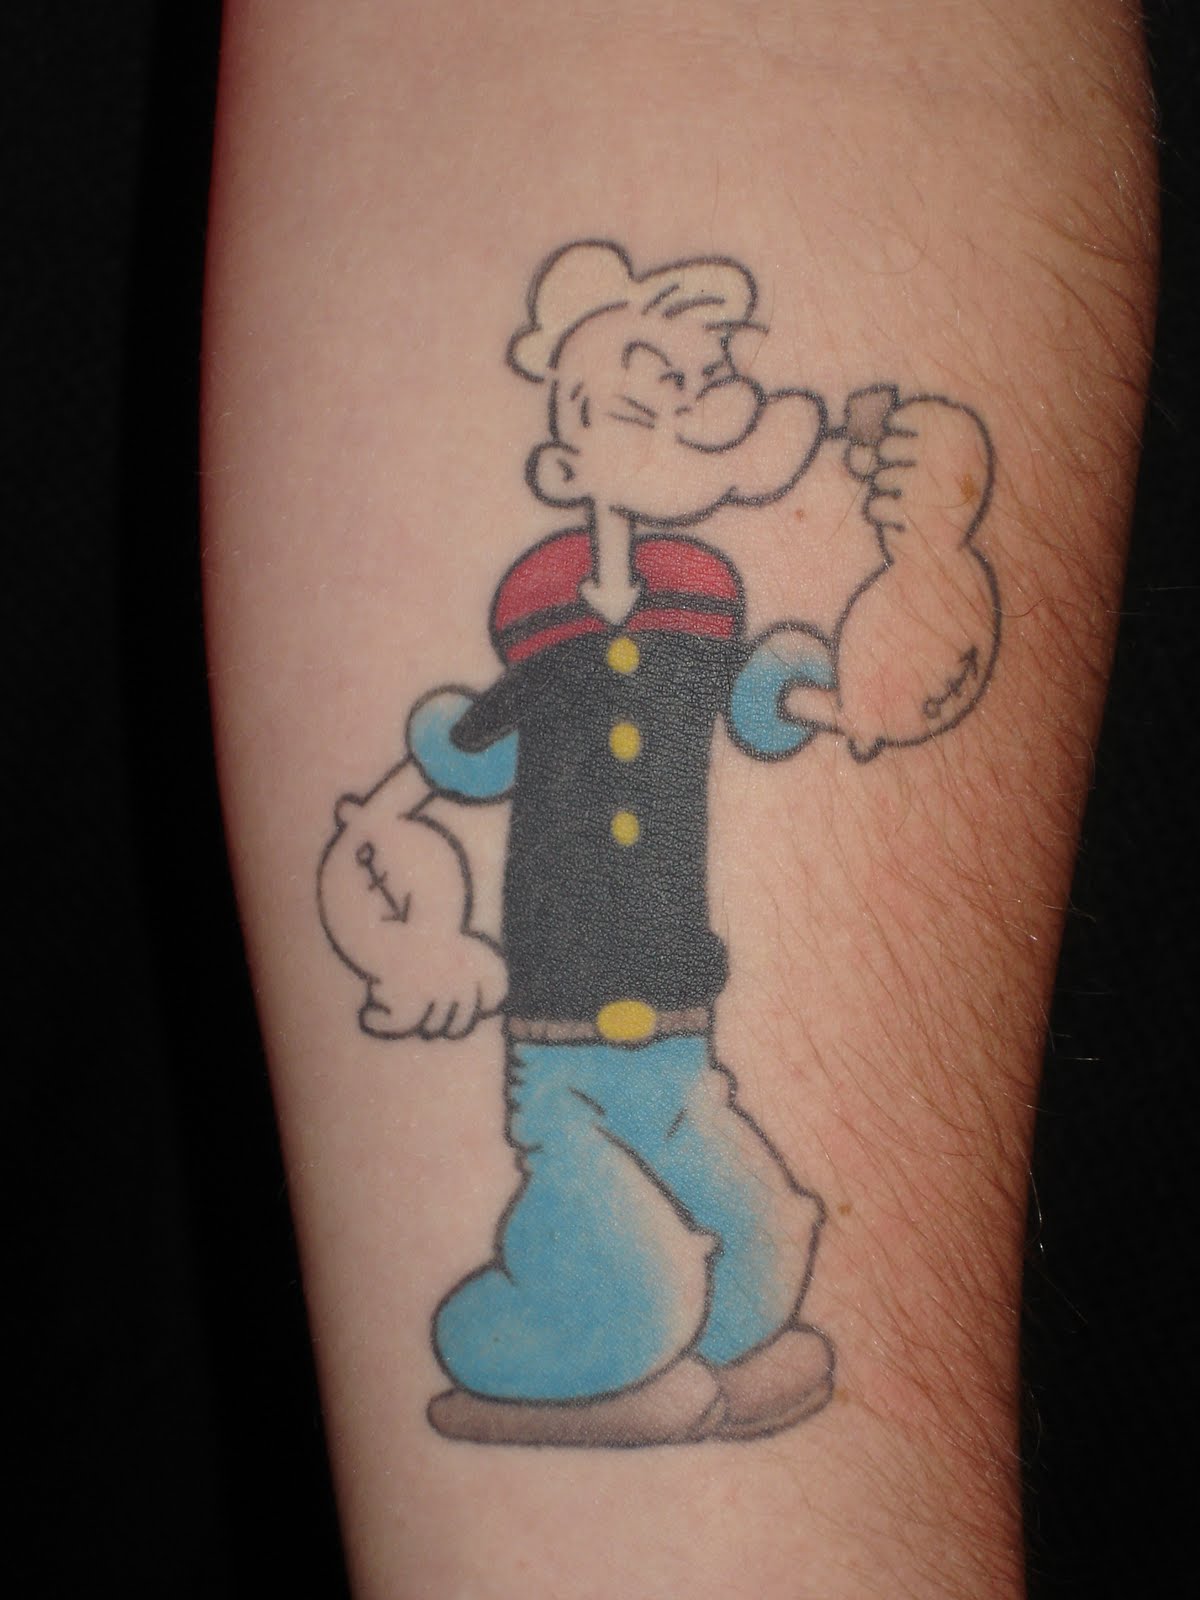 Popeye Tattoos Designs, Ideas and Meaning | Tattoos For You